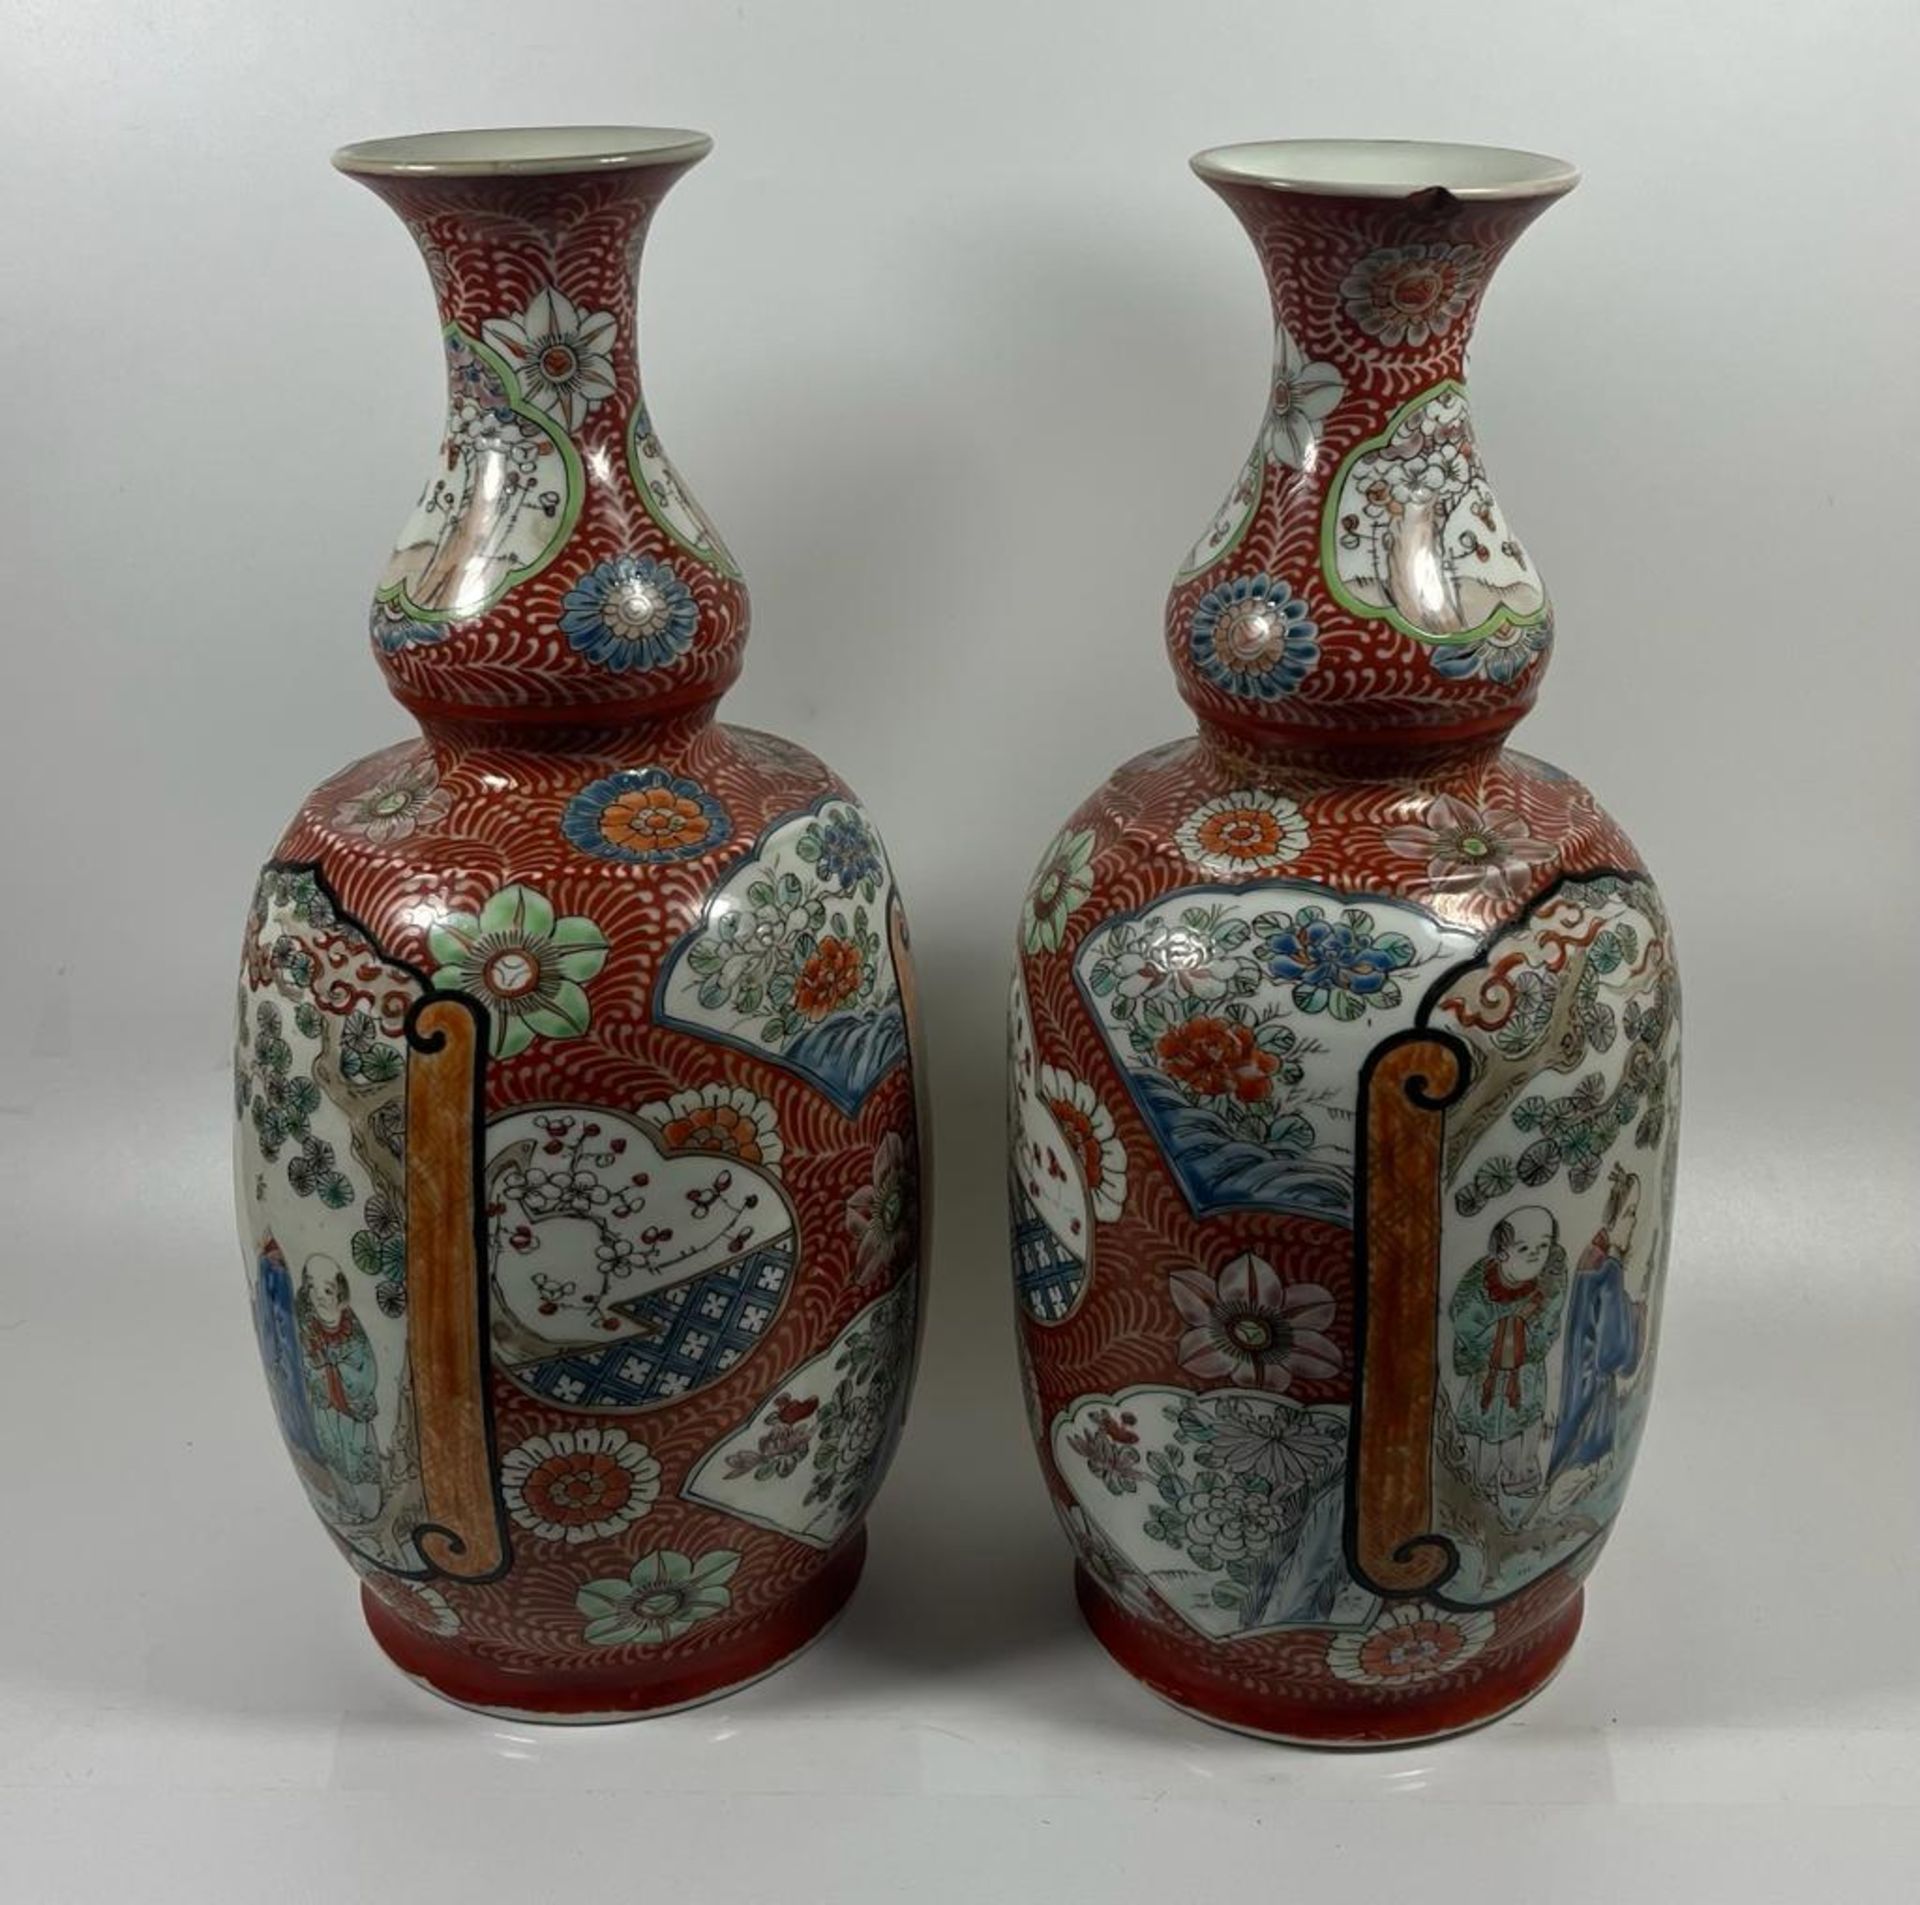 A PAIR OF JAPANESE EARLY TO MID 20TH CENTURY DOUBLE GOURD TYPE VASES WITH HAND PAINTED ENAMELLED - Image 5 of 10